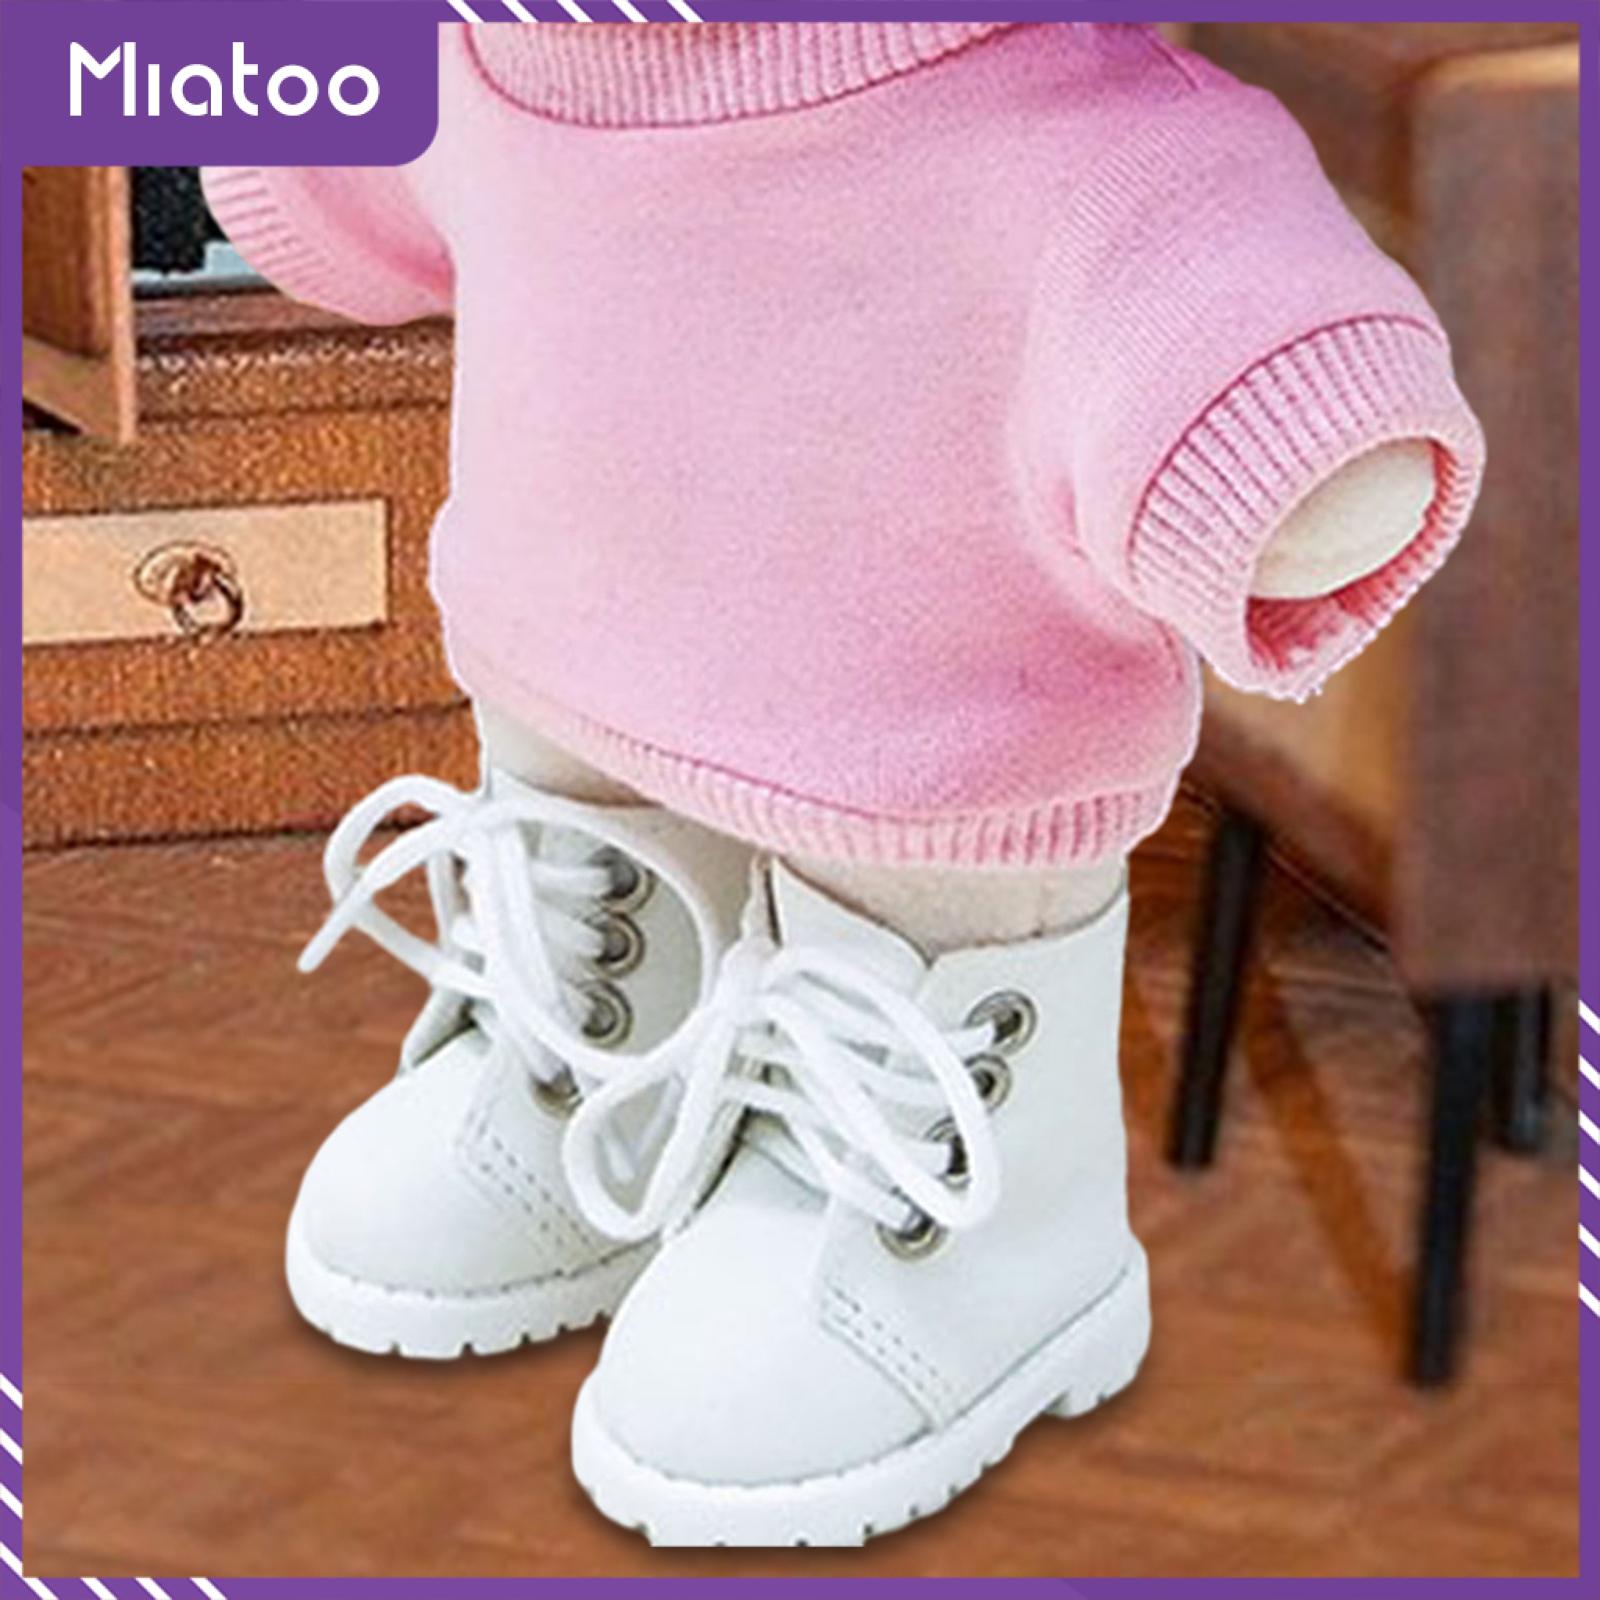 Miatoo 1 6 Scale Doll Shoes Accs for 20cm Ball Jointed Dolls Dress up DIY